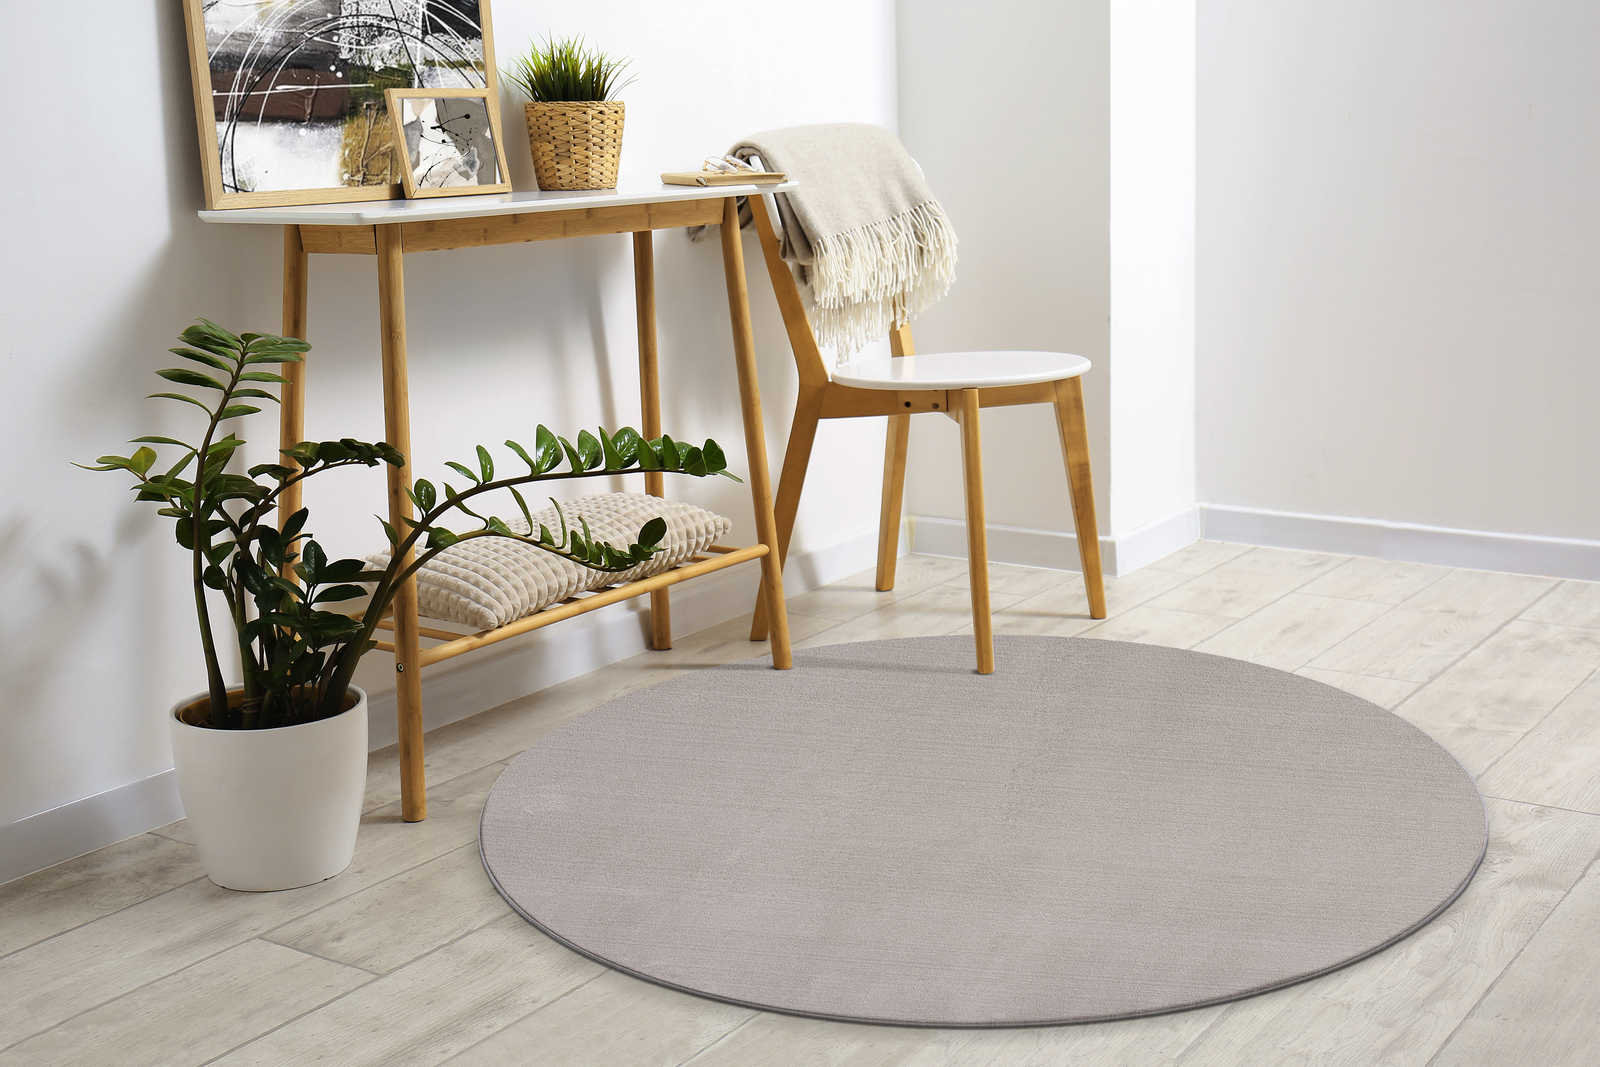 Fashionable Round High Pile Rug in Sand - Ø 120 cm
